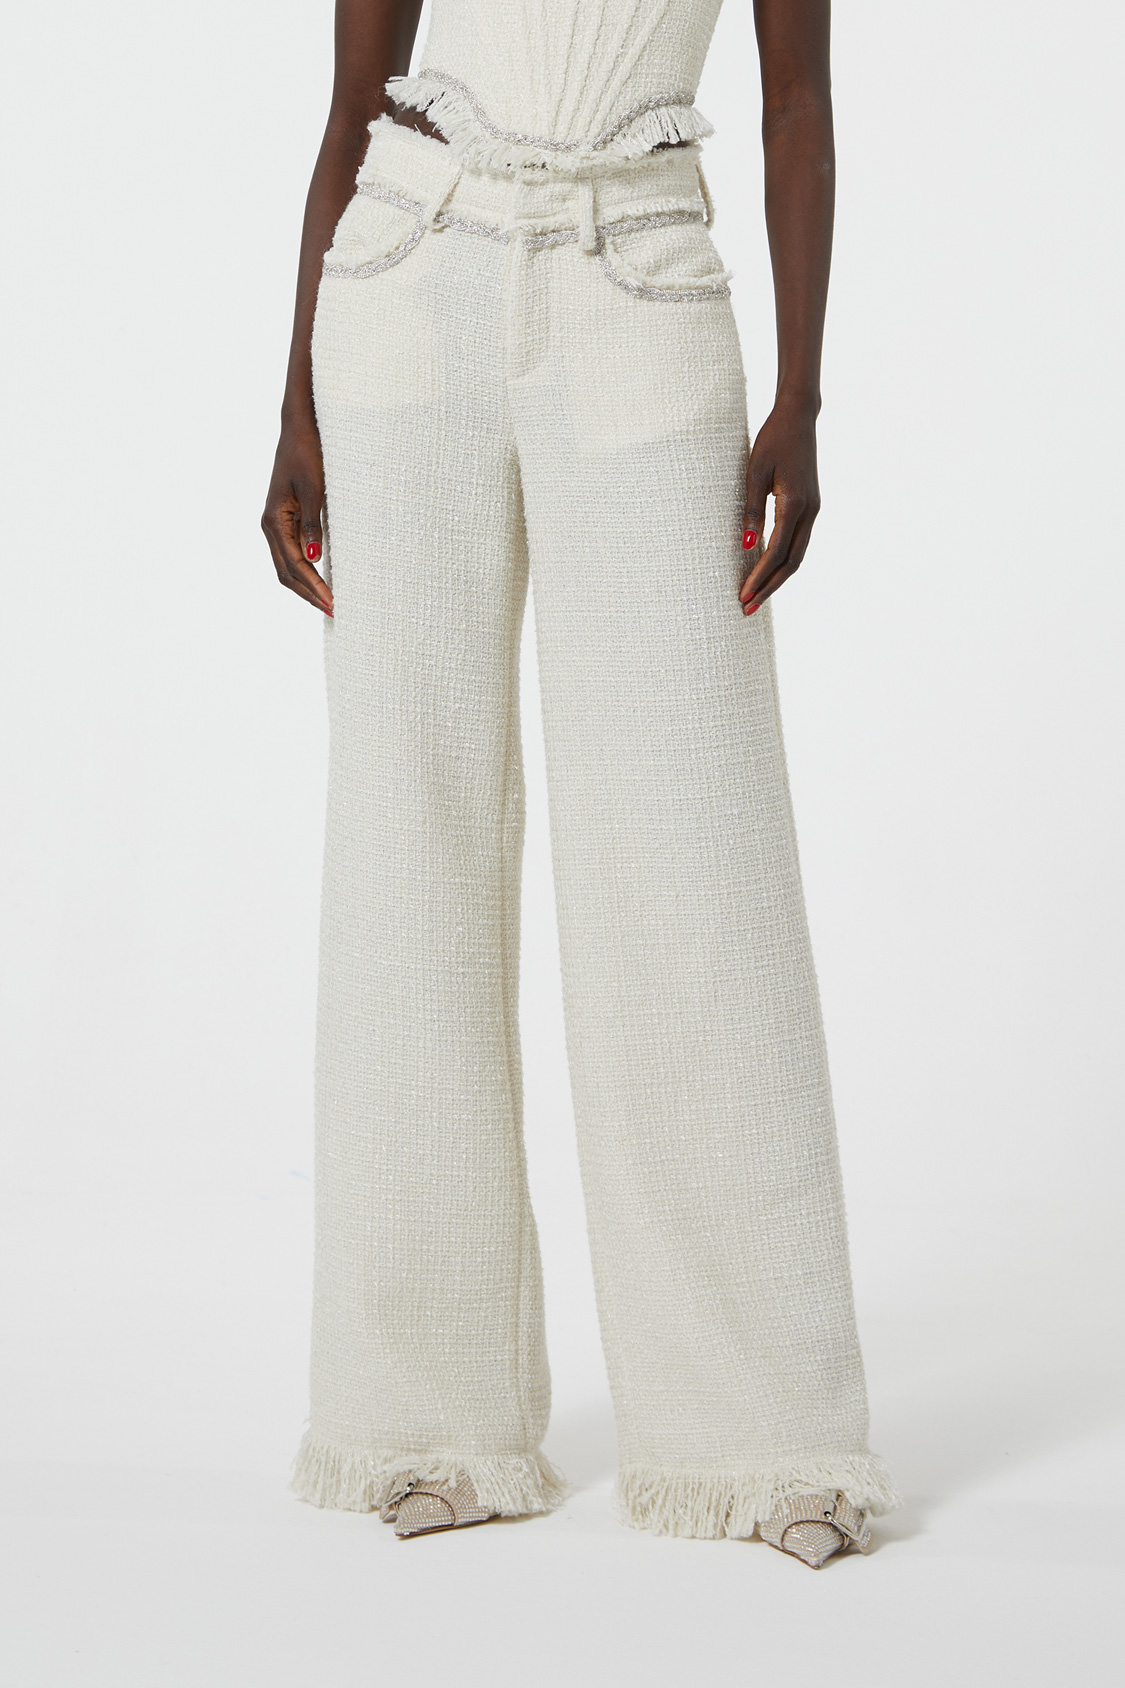 MADE IN ITALY PANTS IN BOUCLÉ FABRIC